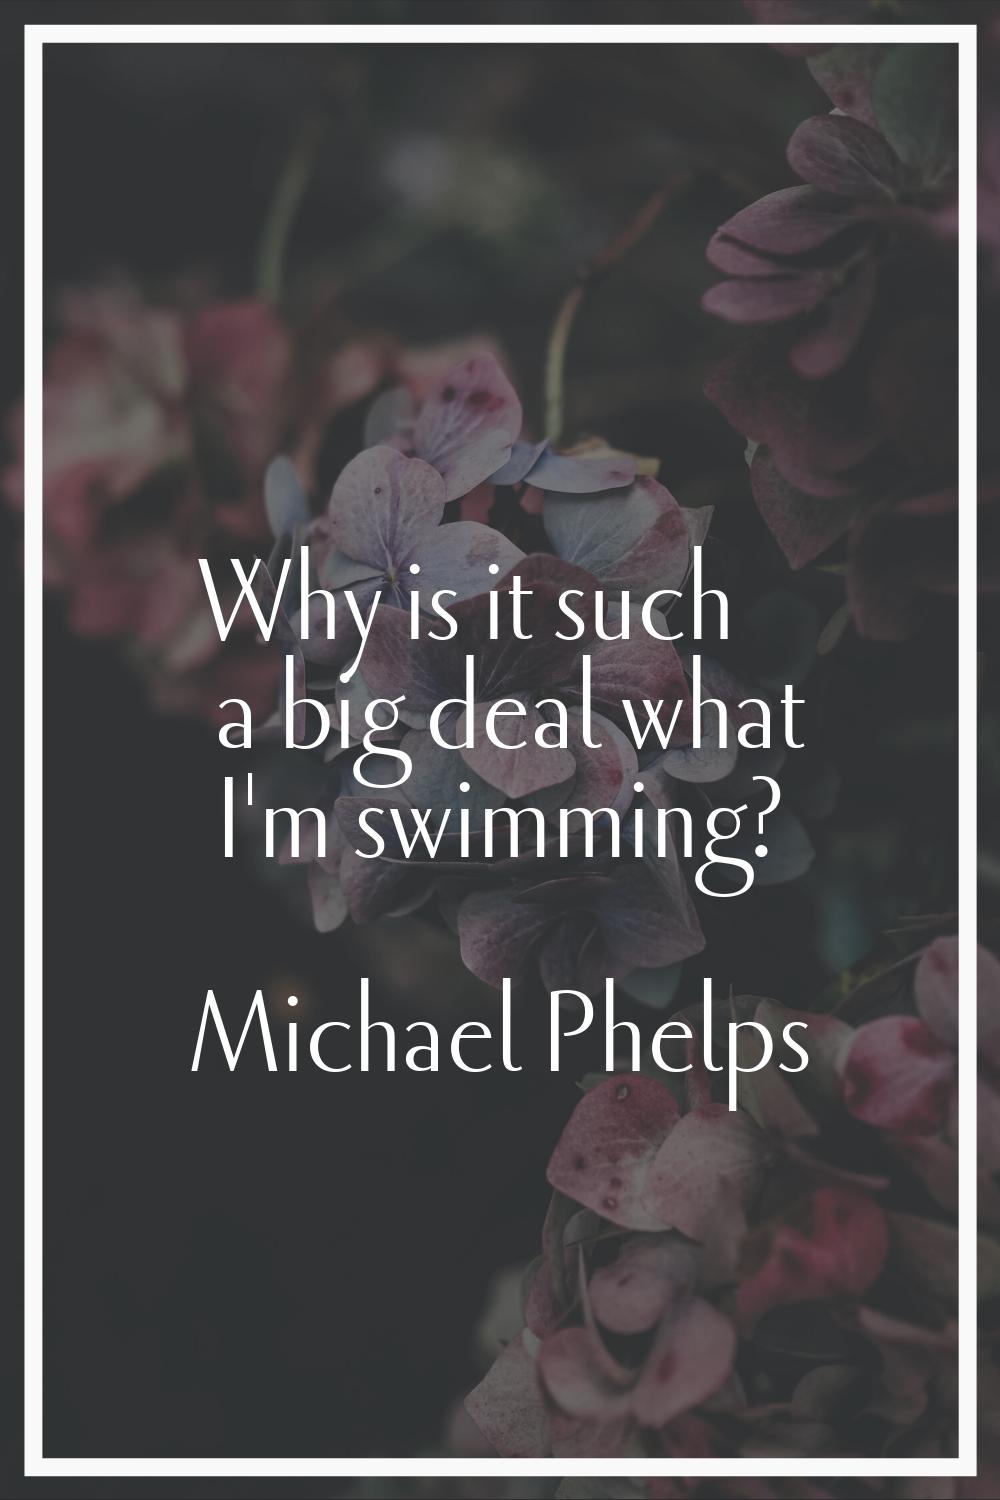 Why is it such a big deal what I'm swimming?